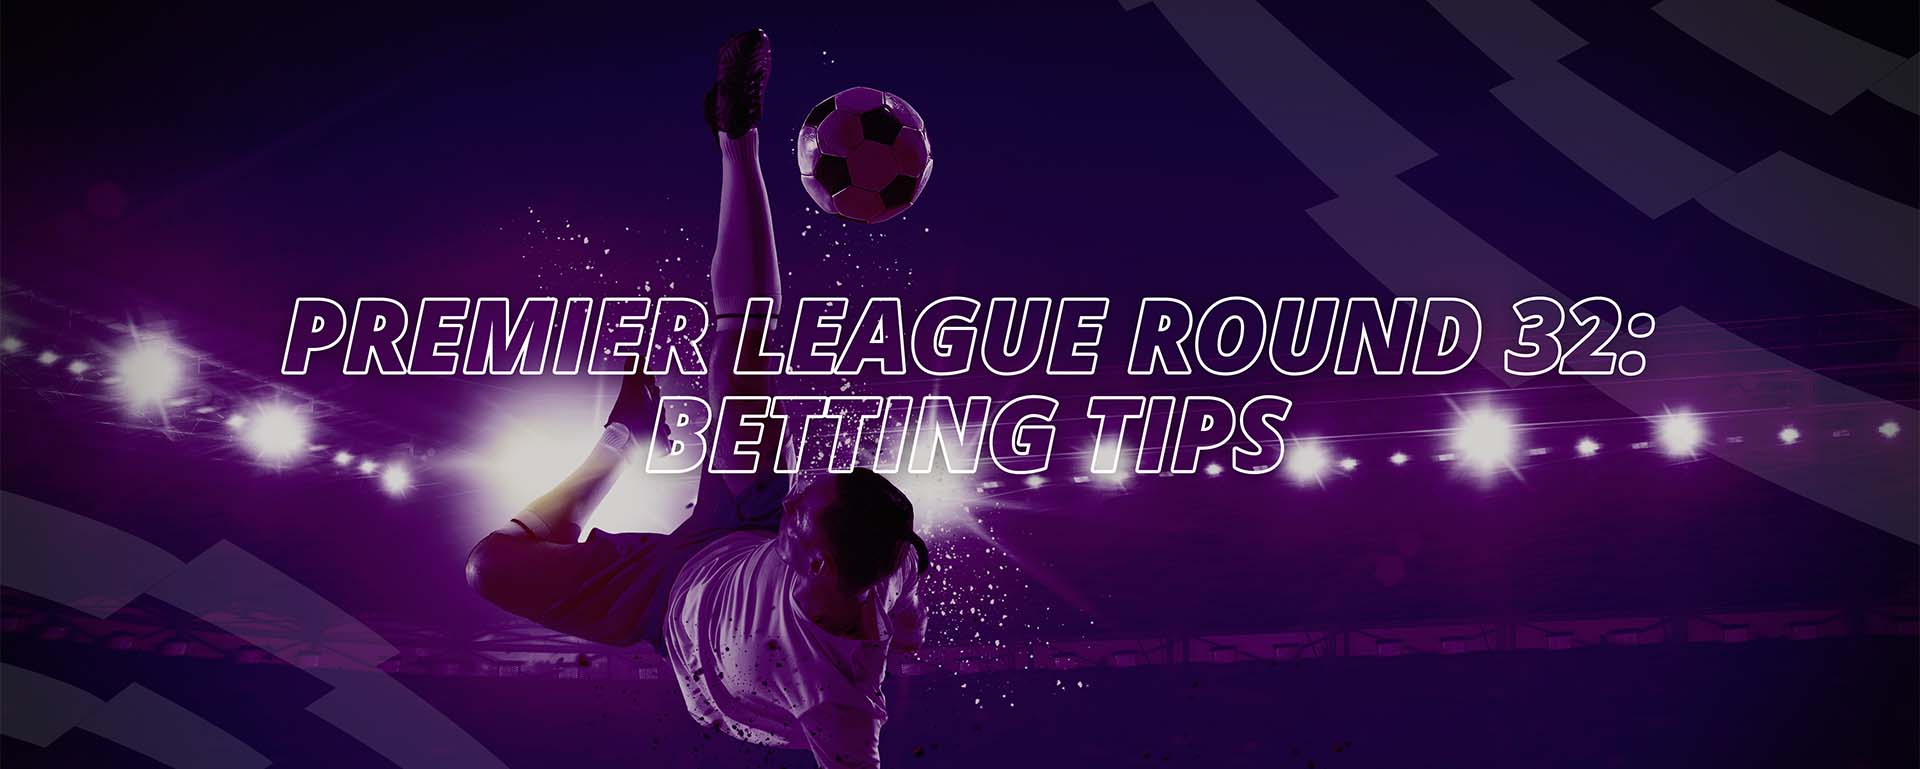 PREMIER LEAGUE ROUND 32: BETTING TIPS